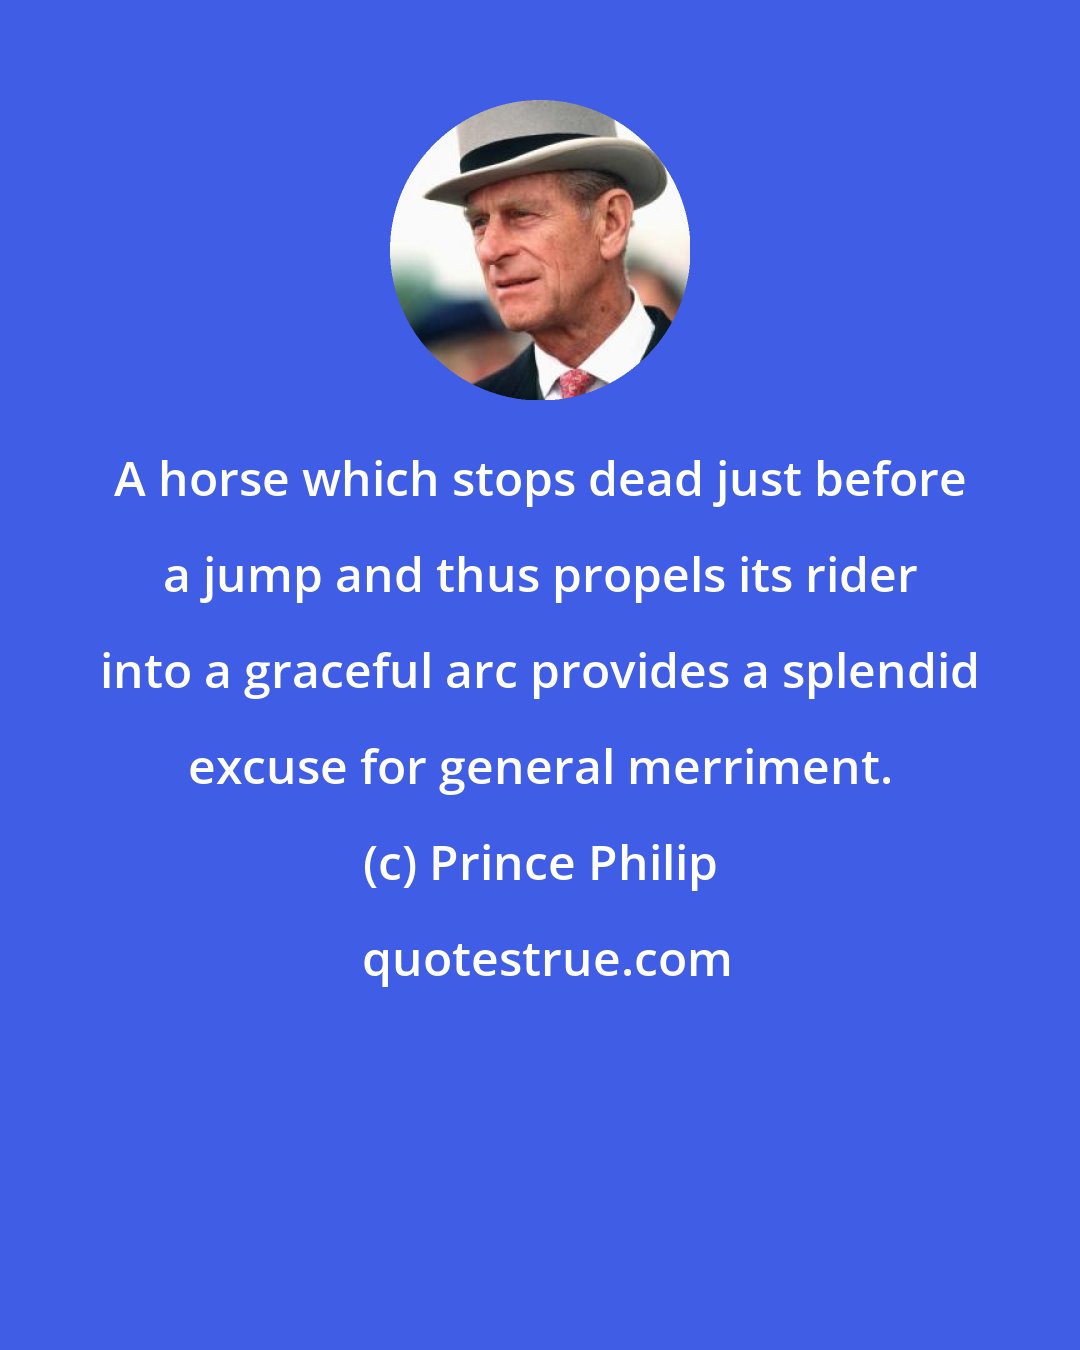 Prince Philip: A horse which stops dead just before a jump and thus propels its rider into a graceful arc provides a splendid excuse for general merriment.